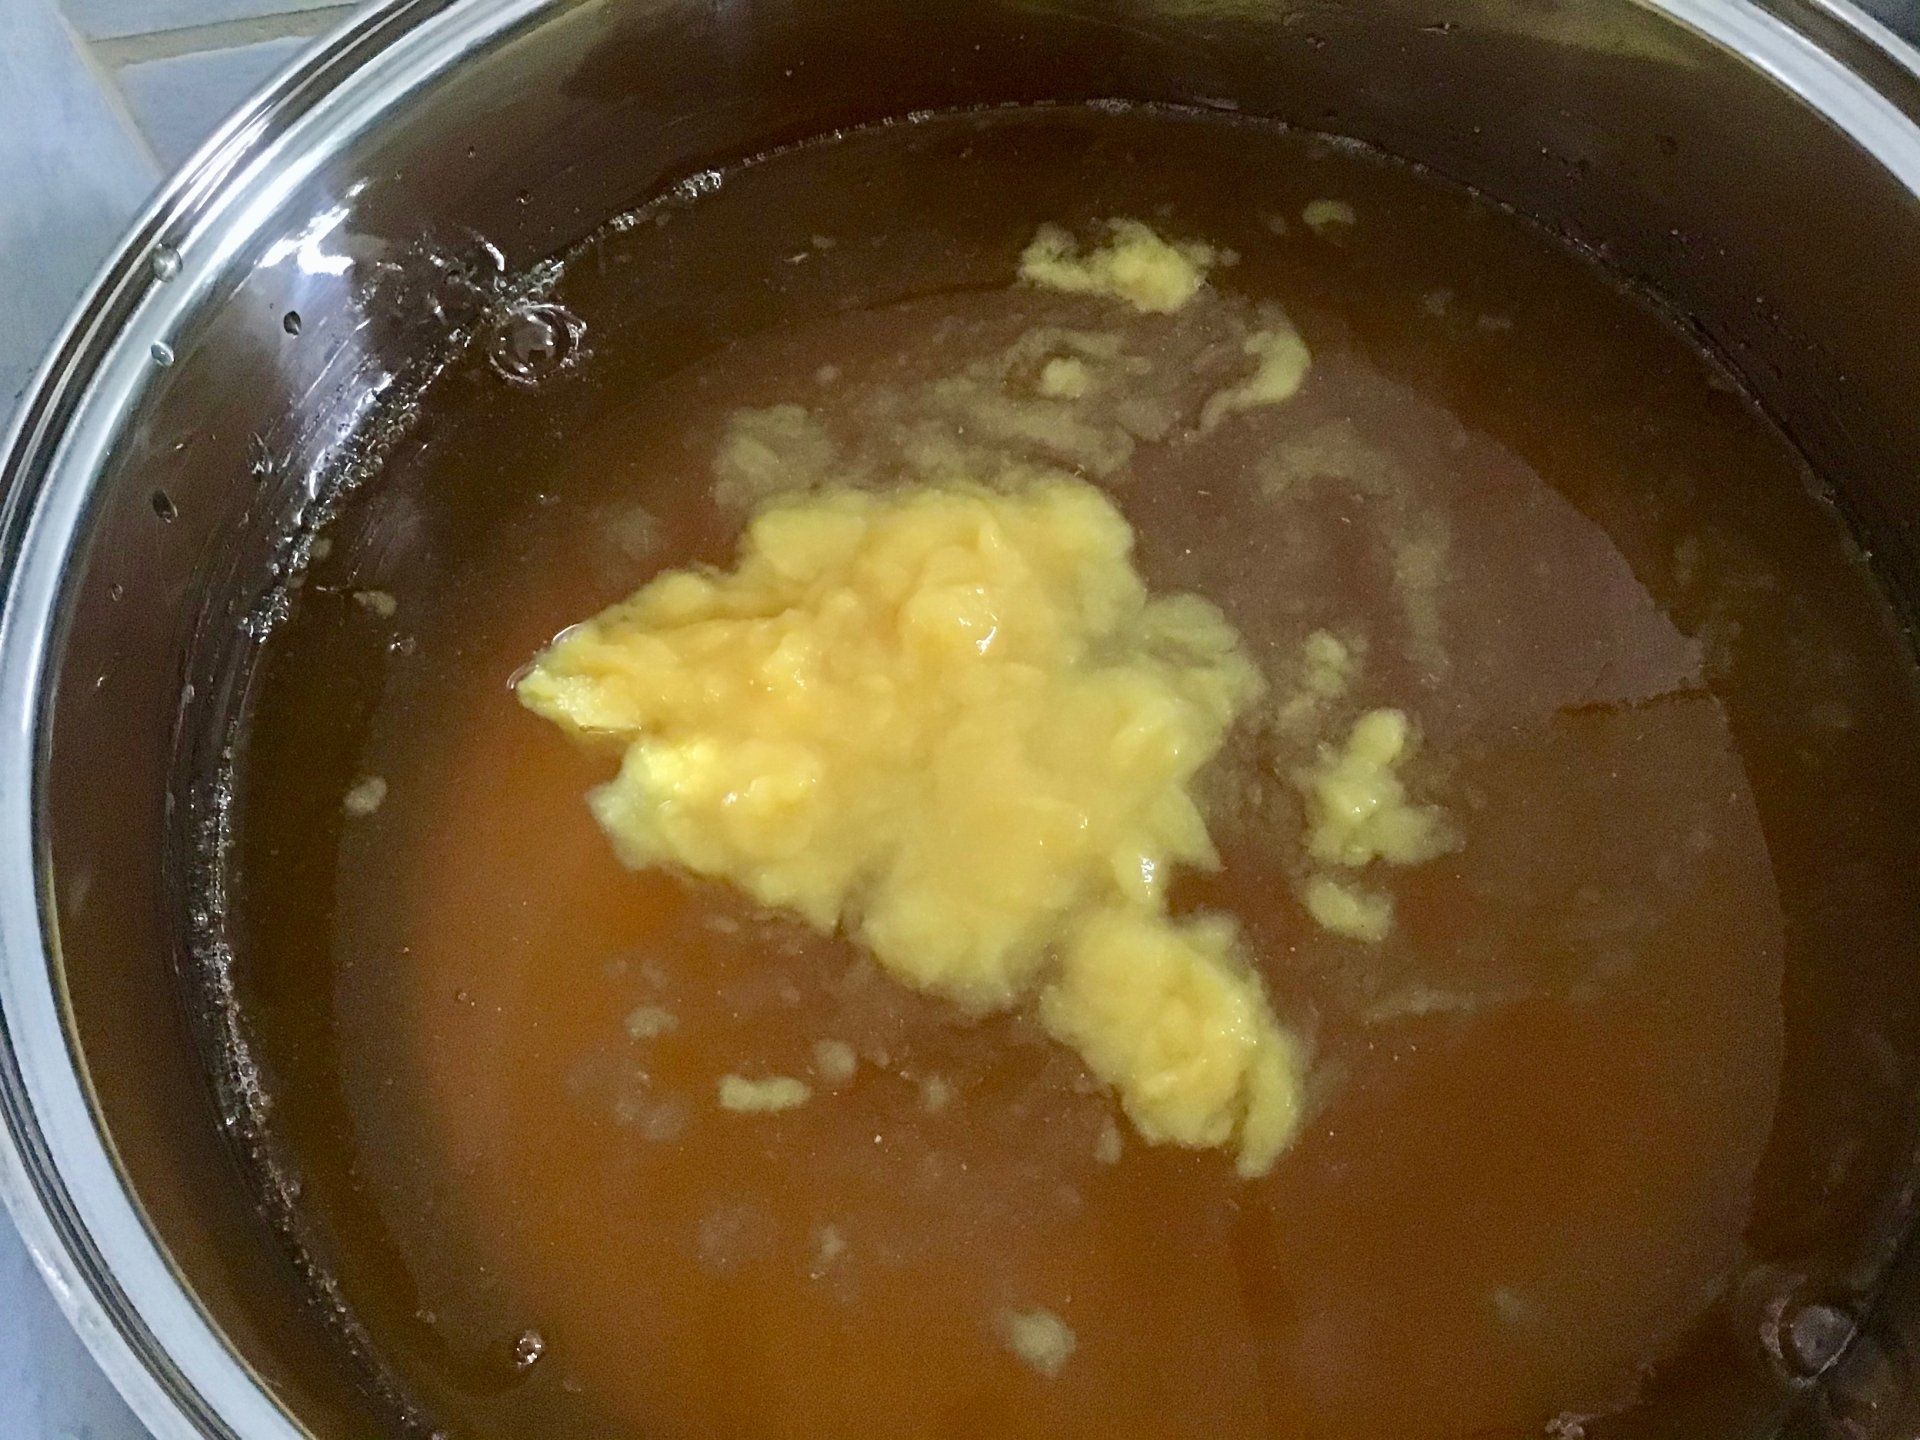 Dissolving pectin in syrup - making marmalade on the Greek Island of Hydra.